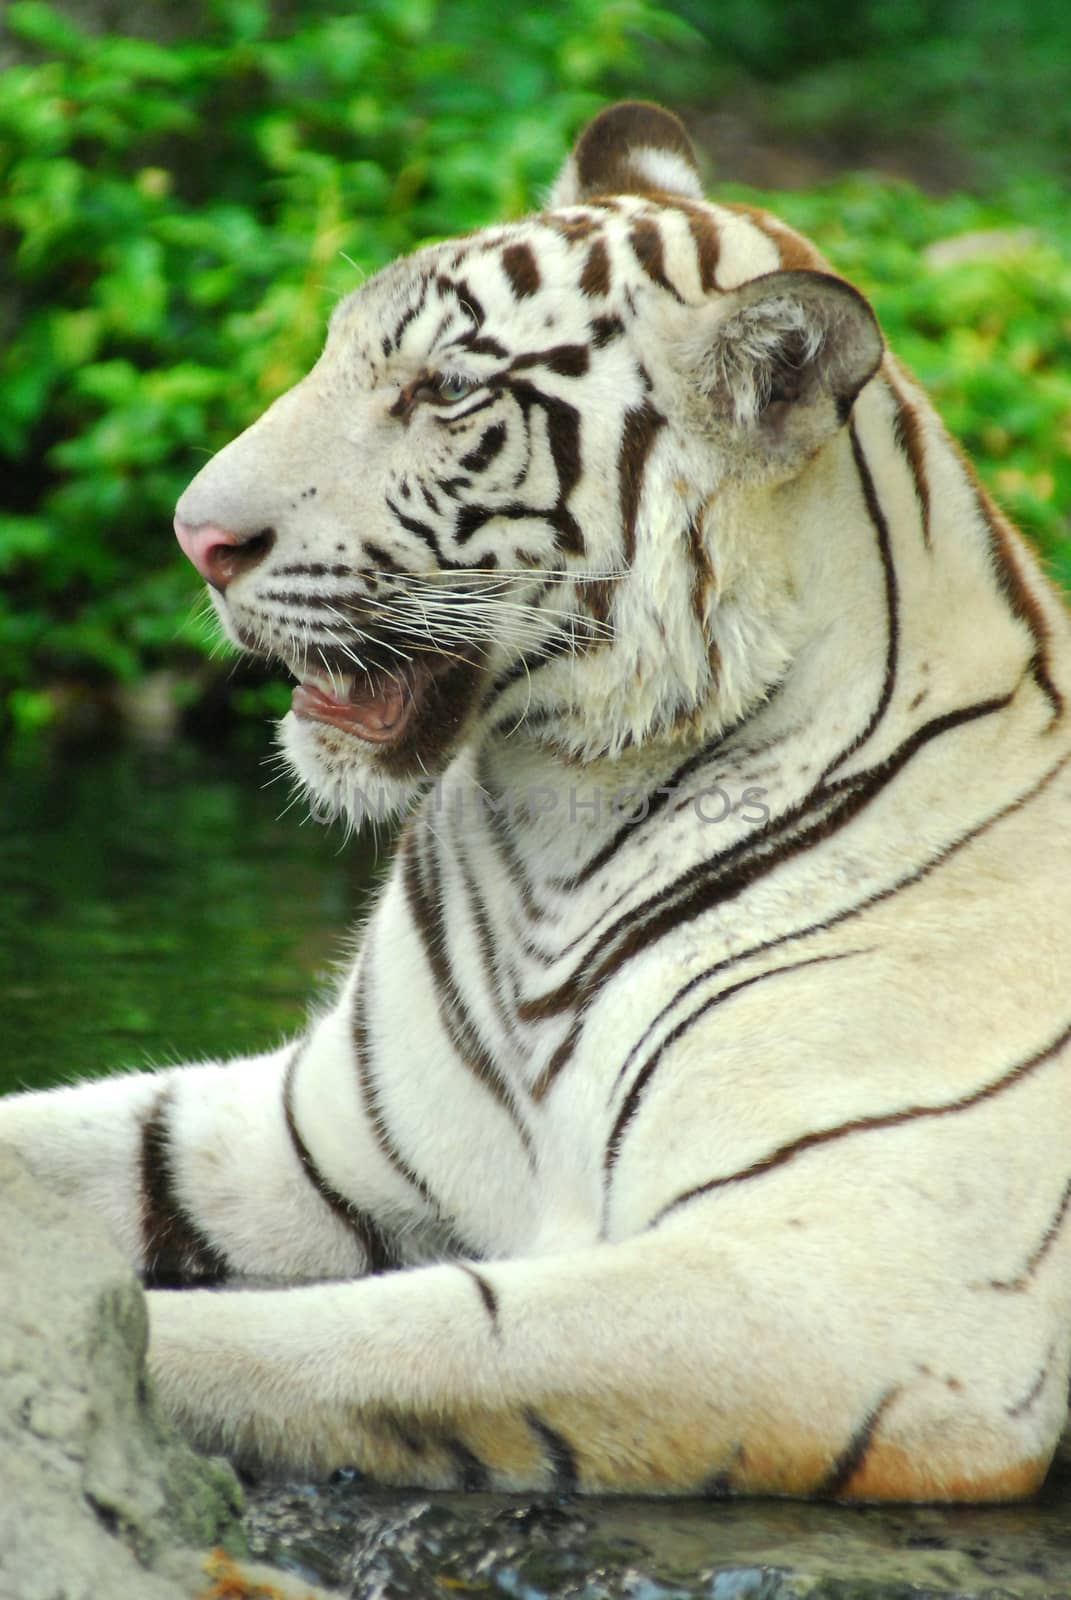 A wild life shot of a white tiger in captivity by think4photop